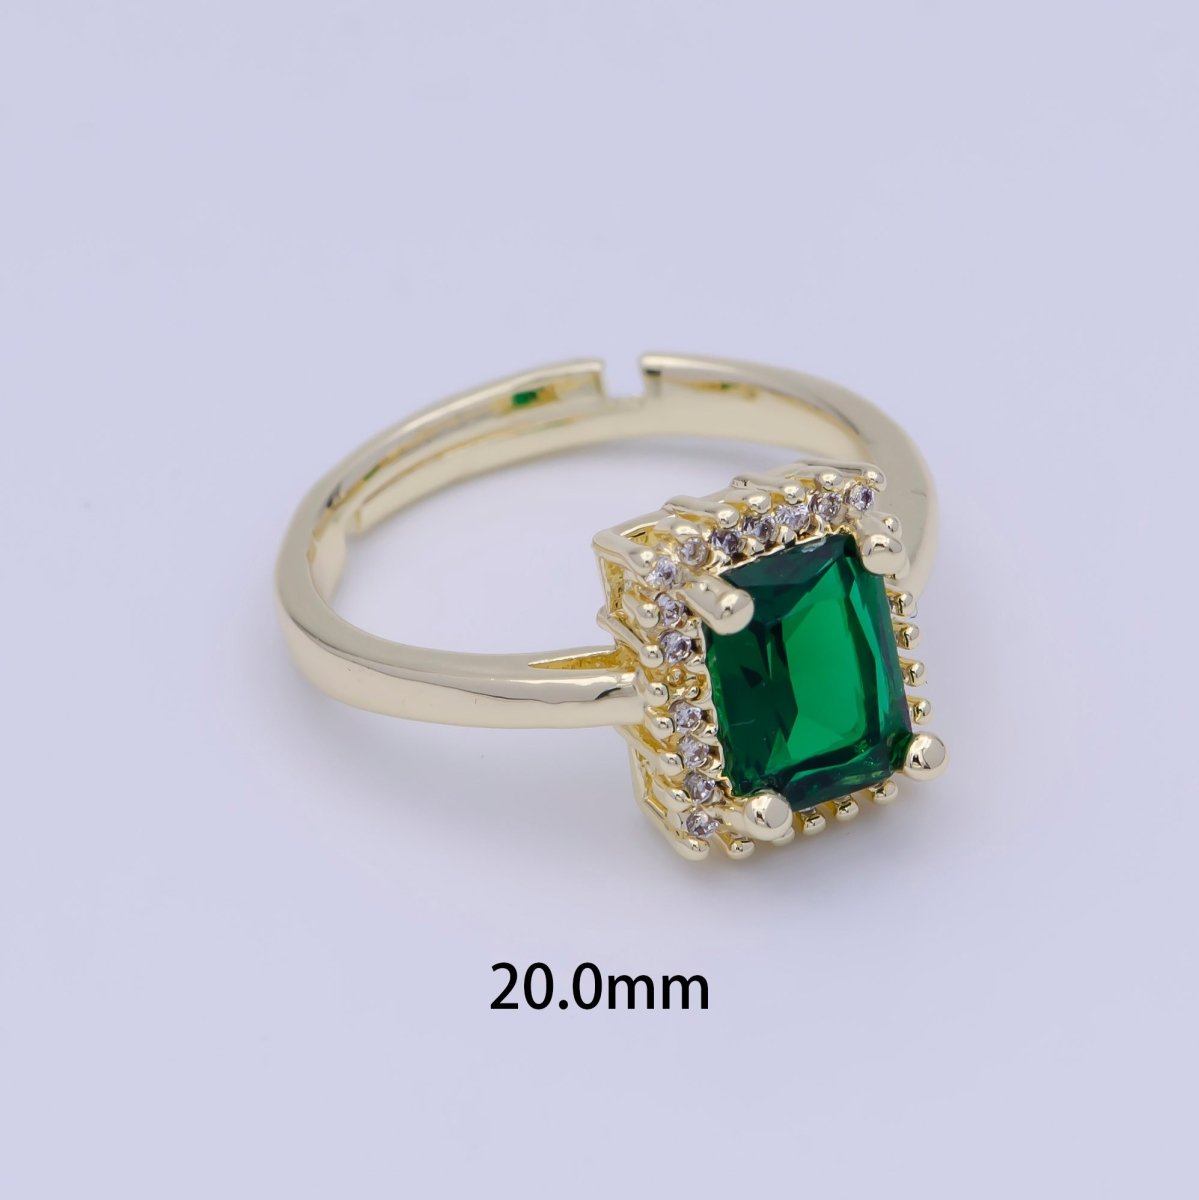 OS Green Emerald Ring Square Emerald Cut Cubic Zirconia Gold Band Adjustable Ring X-622 - DLUXCA